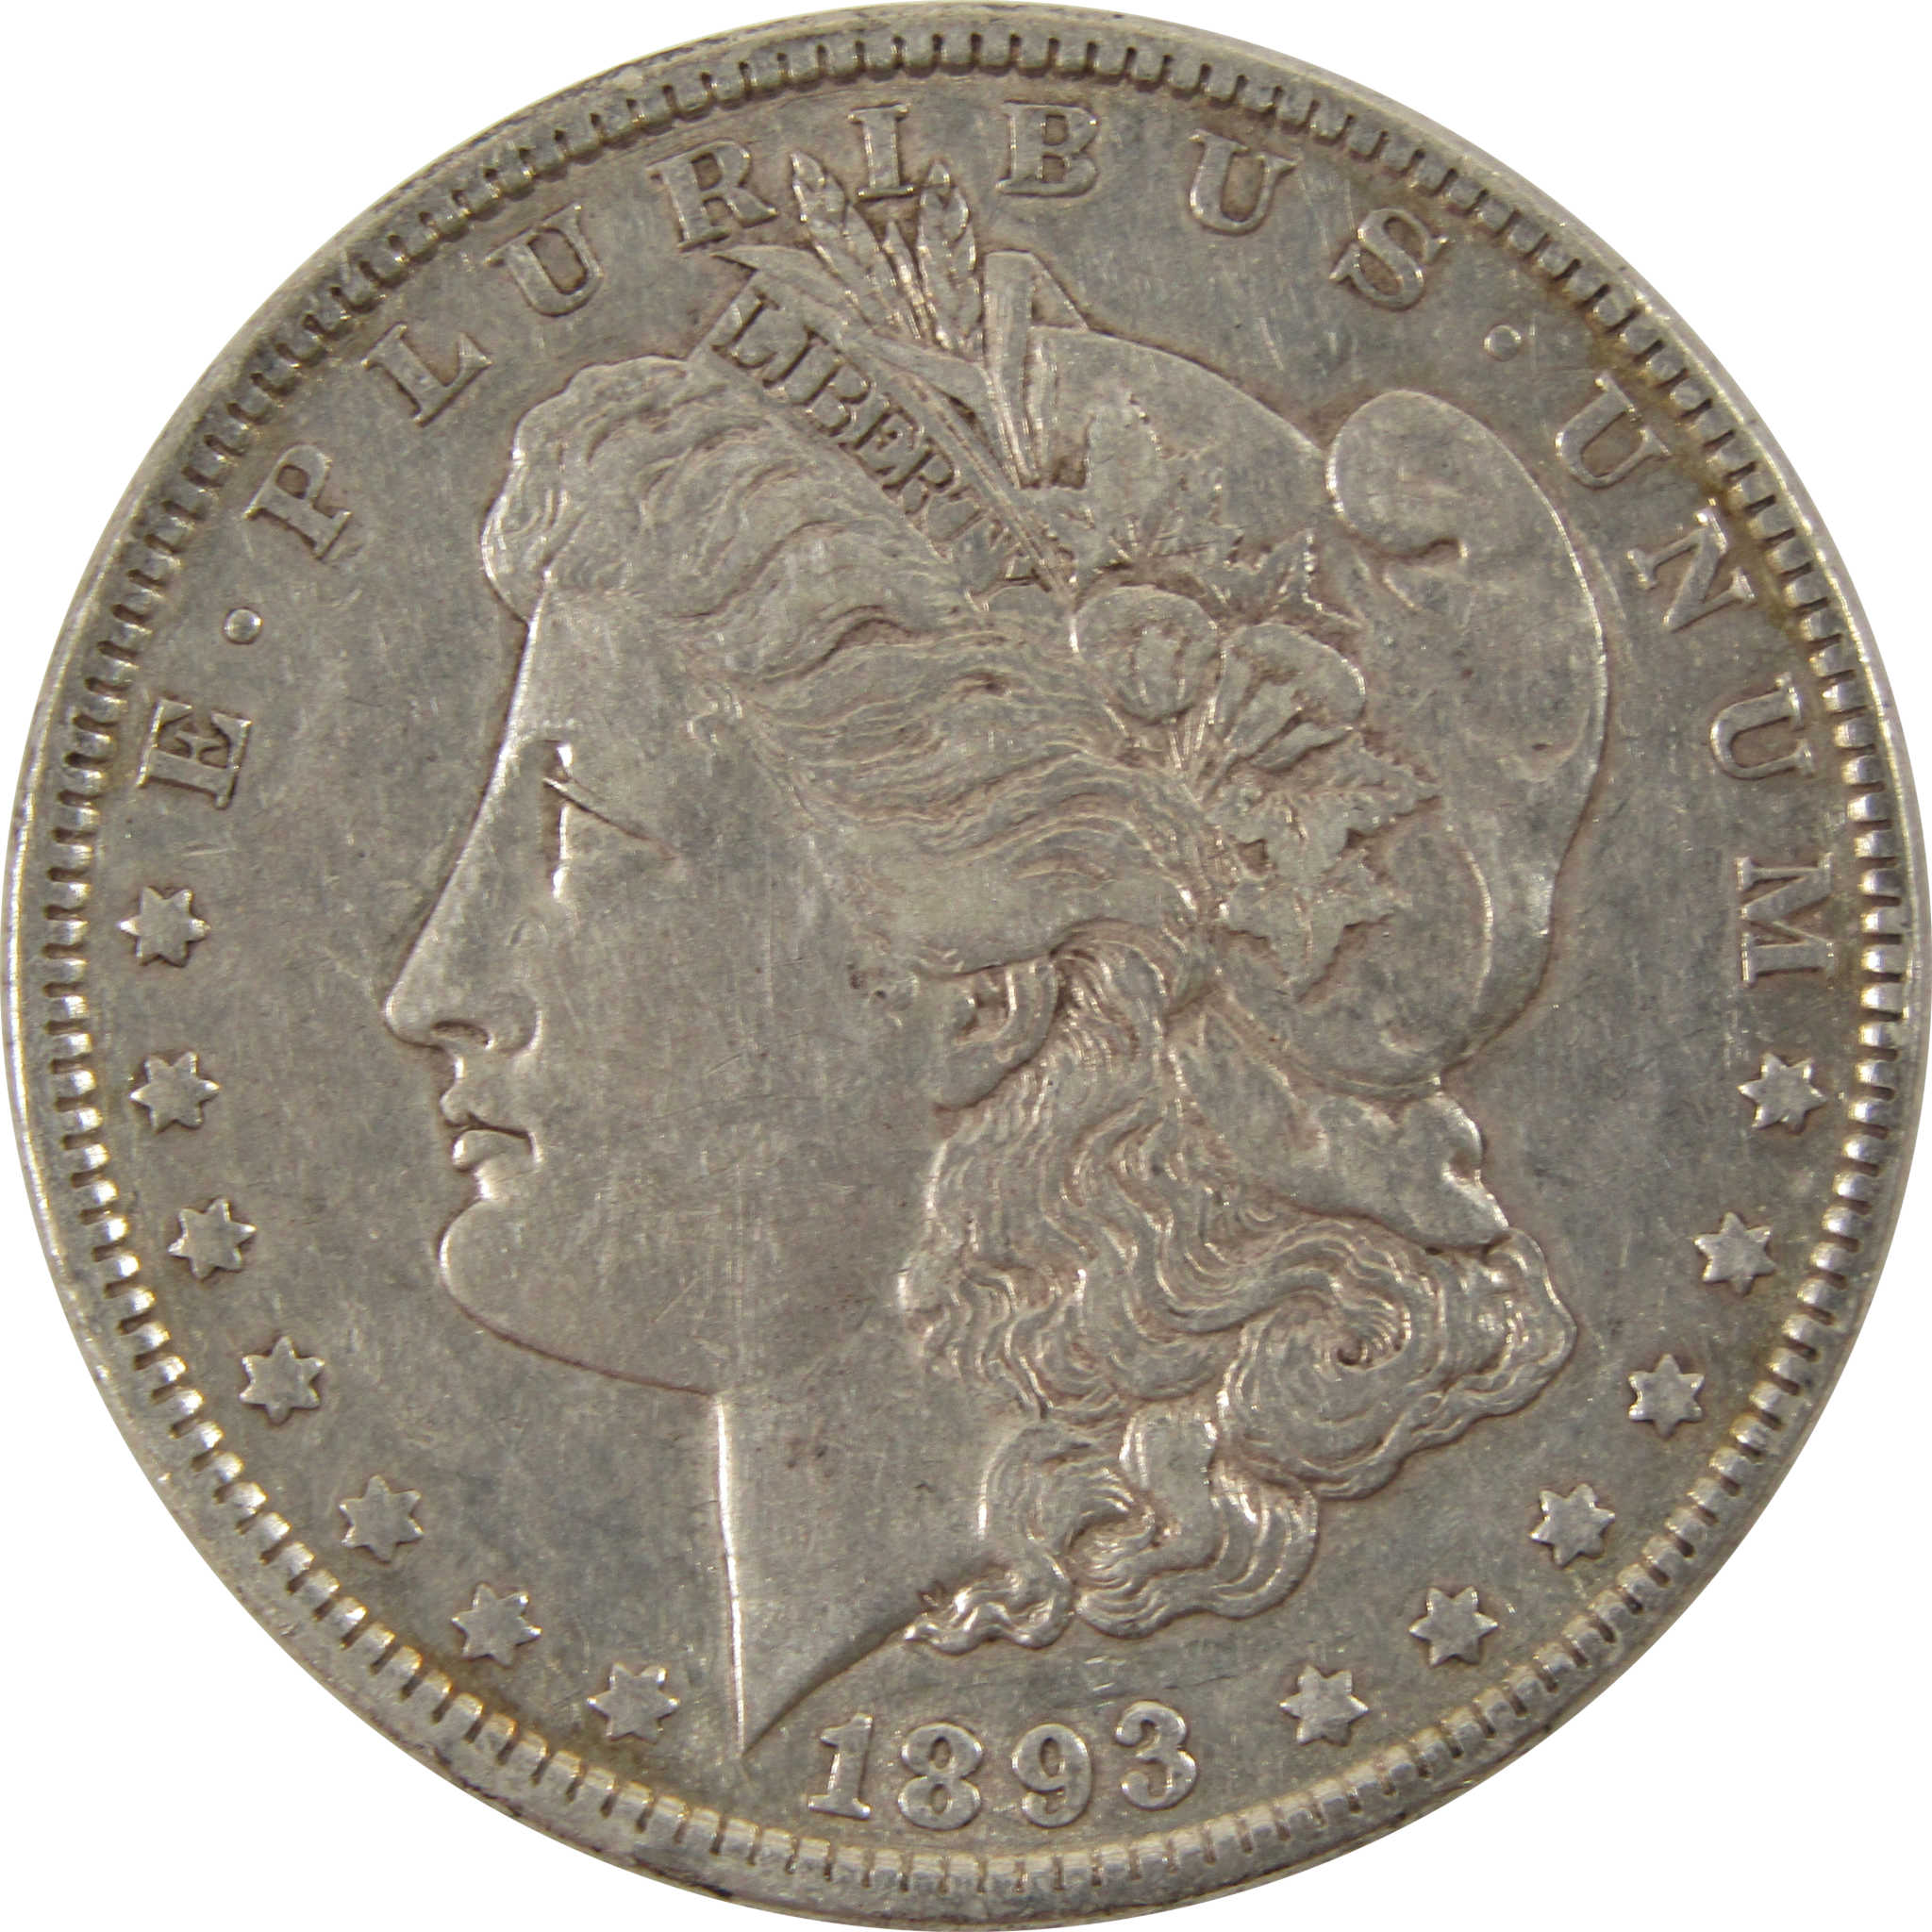 1893 Morgan Dollar XF EF Extremely Fine 90% Silver $1 Coin SKU:I8000 - Morgan coin - Morgan silver dollar - Morgan silver dollar for sale - Profile Coins &amp; Collectibles